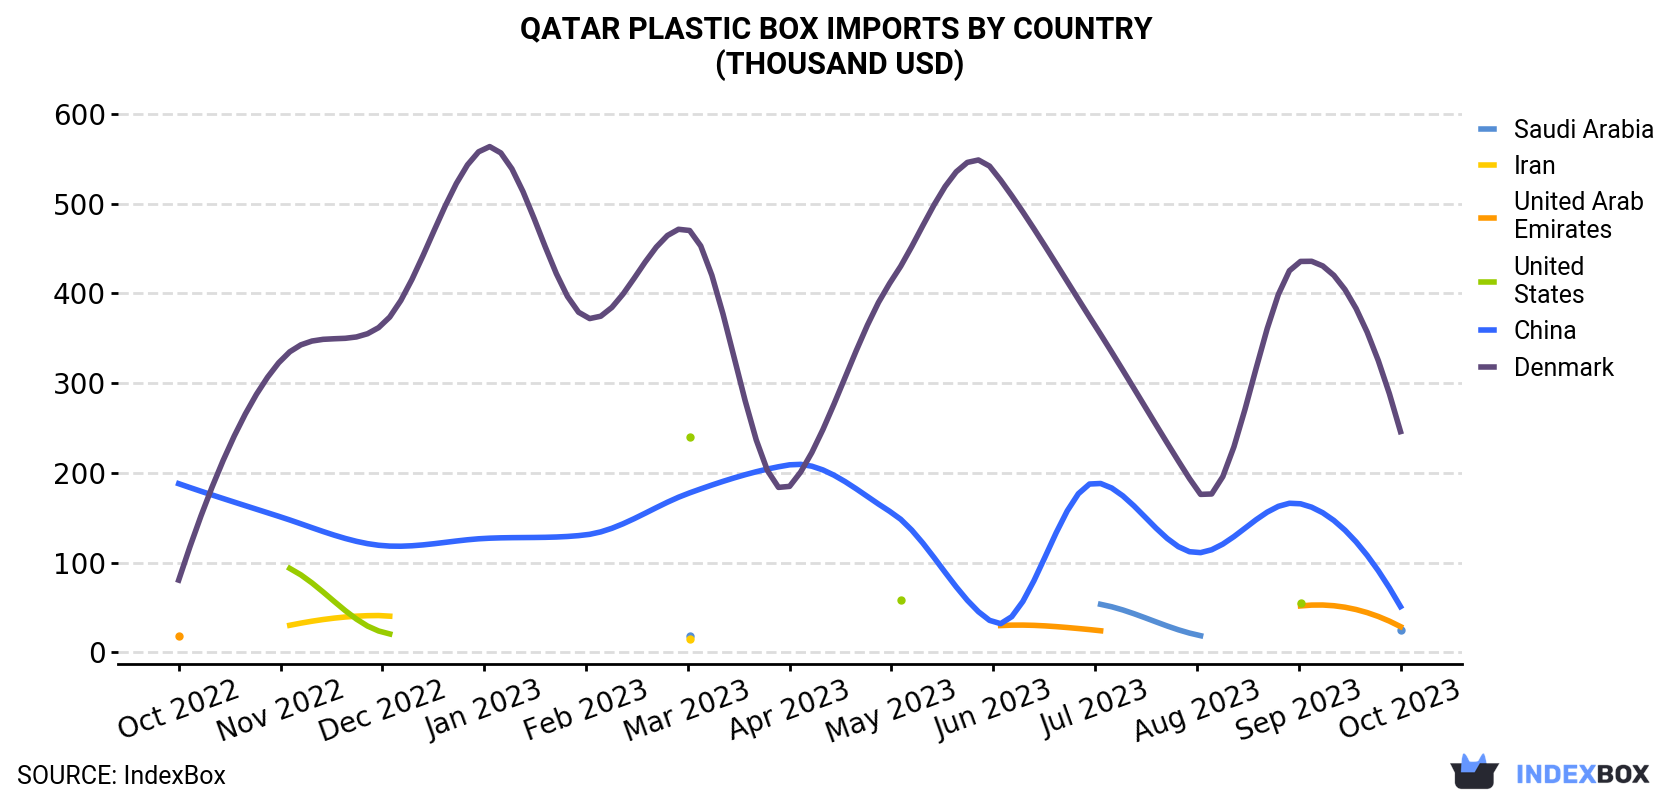 Qatar Plastic Box Imports By Country (Thousand USD)